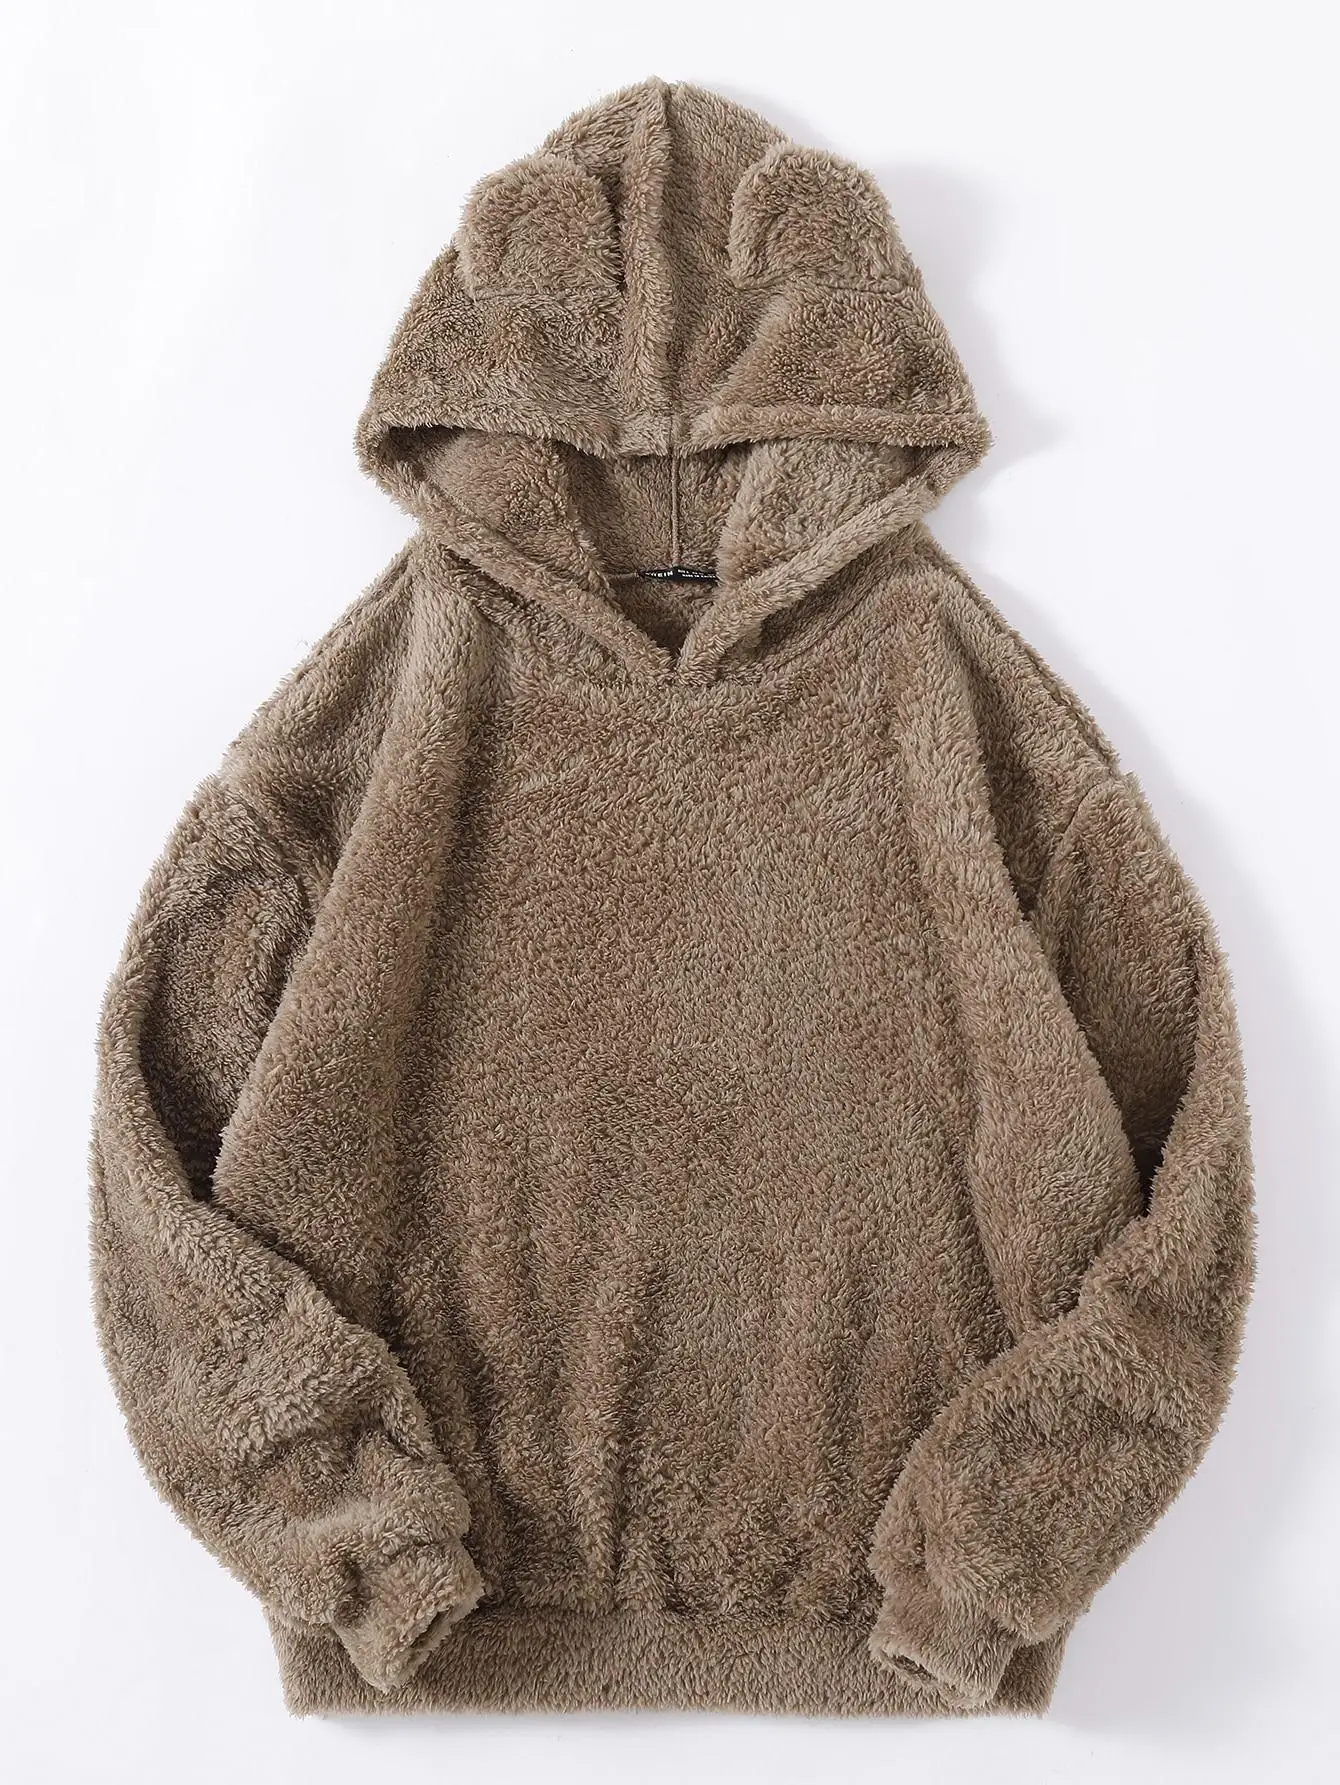 

2022 Autumn and Winter New Fluffy Bear Ears Hooded Hoodies Women Solid Color Warm Plush Sweatershirts Jumper